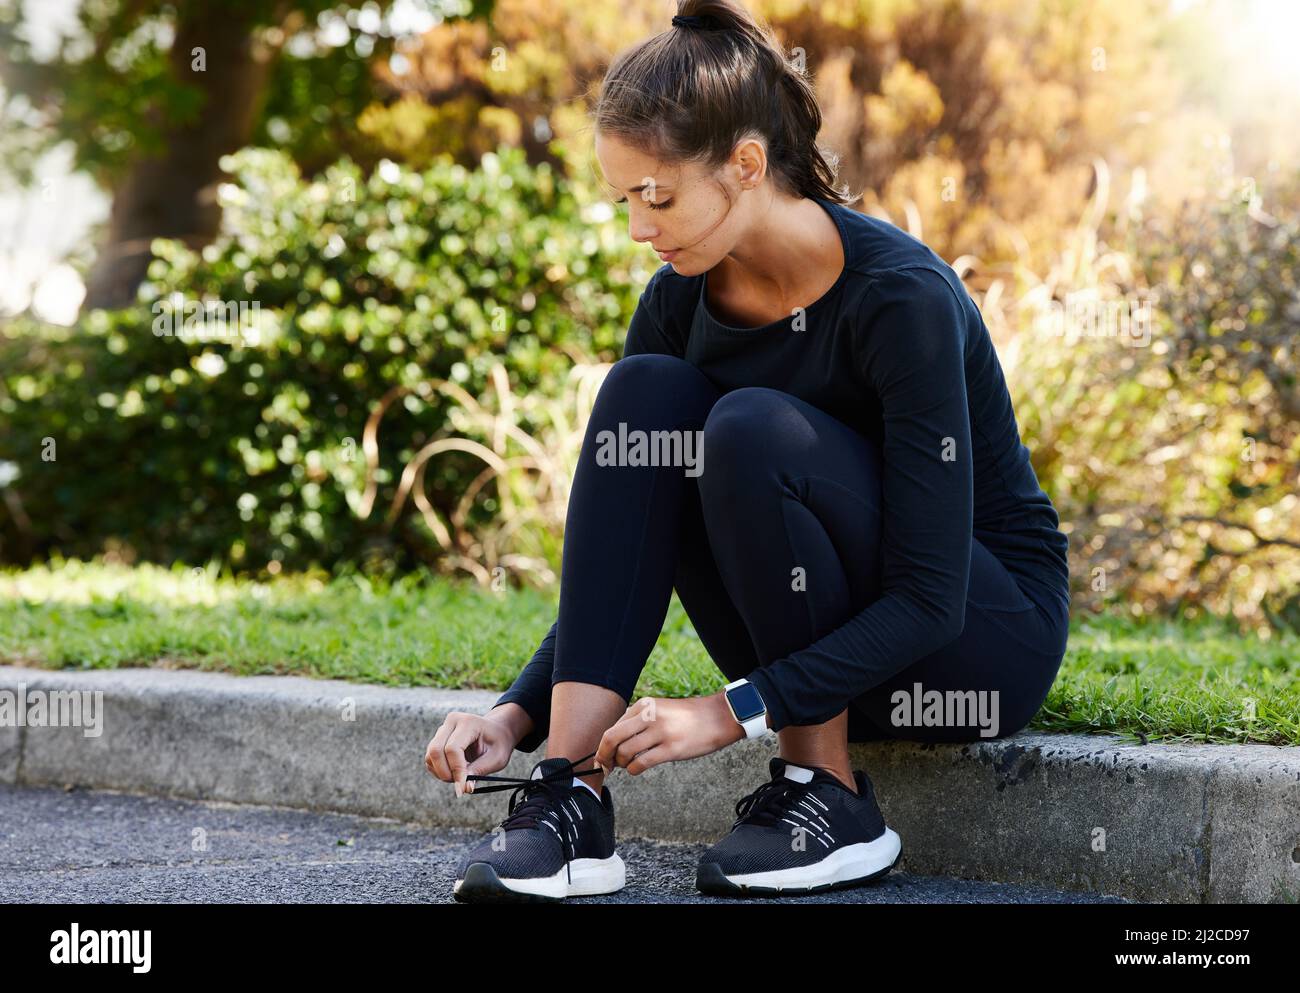 Making sure her laces are nice and tight. Full length shot of an attractive and athletic young woman tying her shoelaces while sitting on the curb Stock Photo